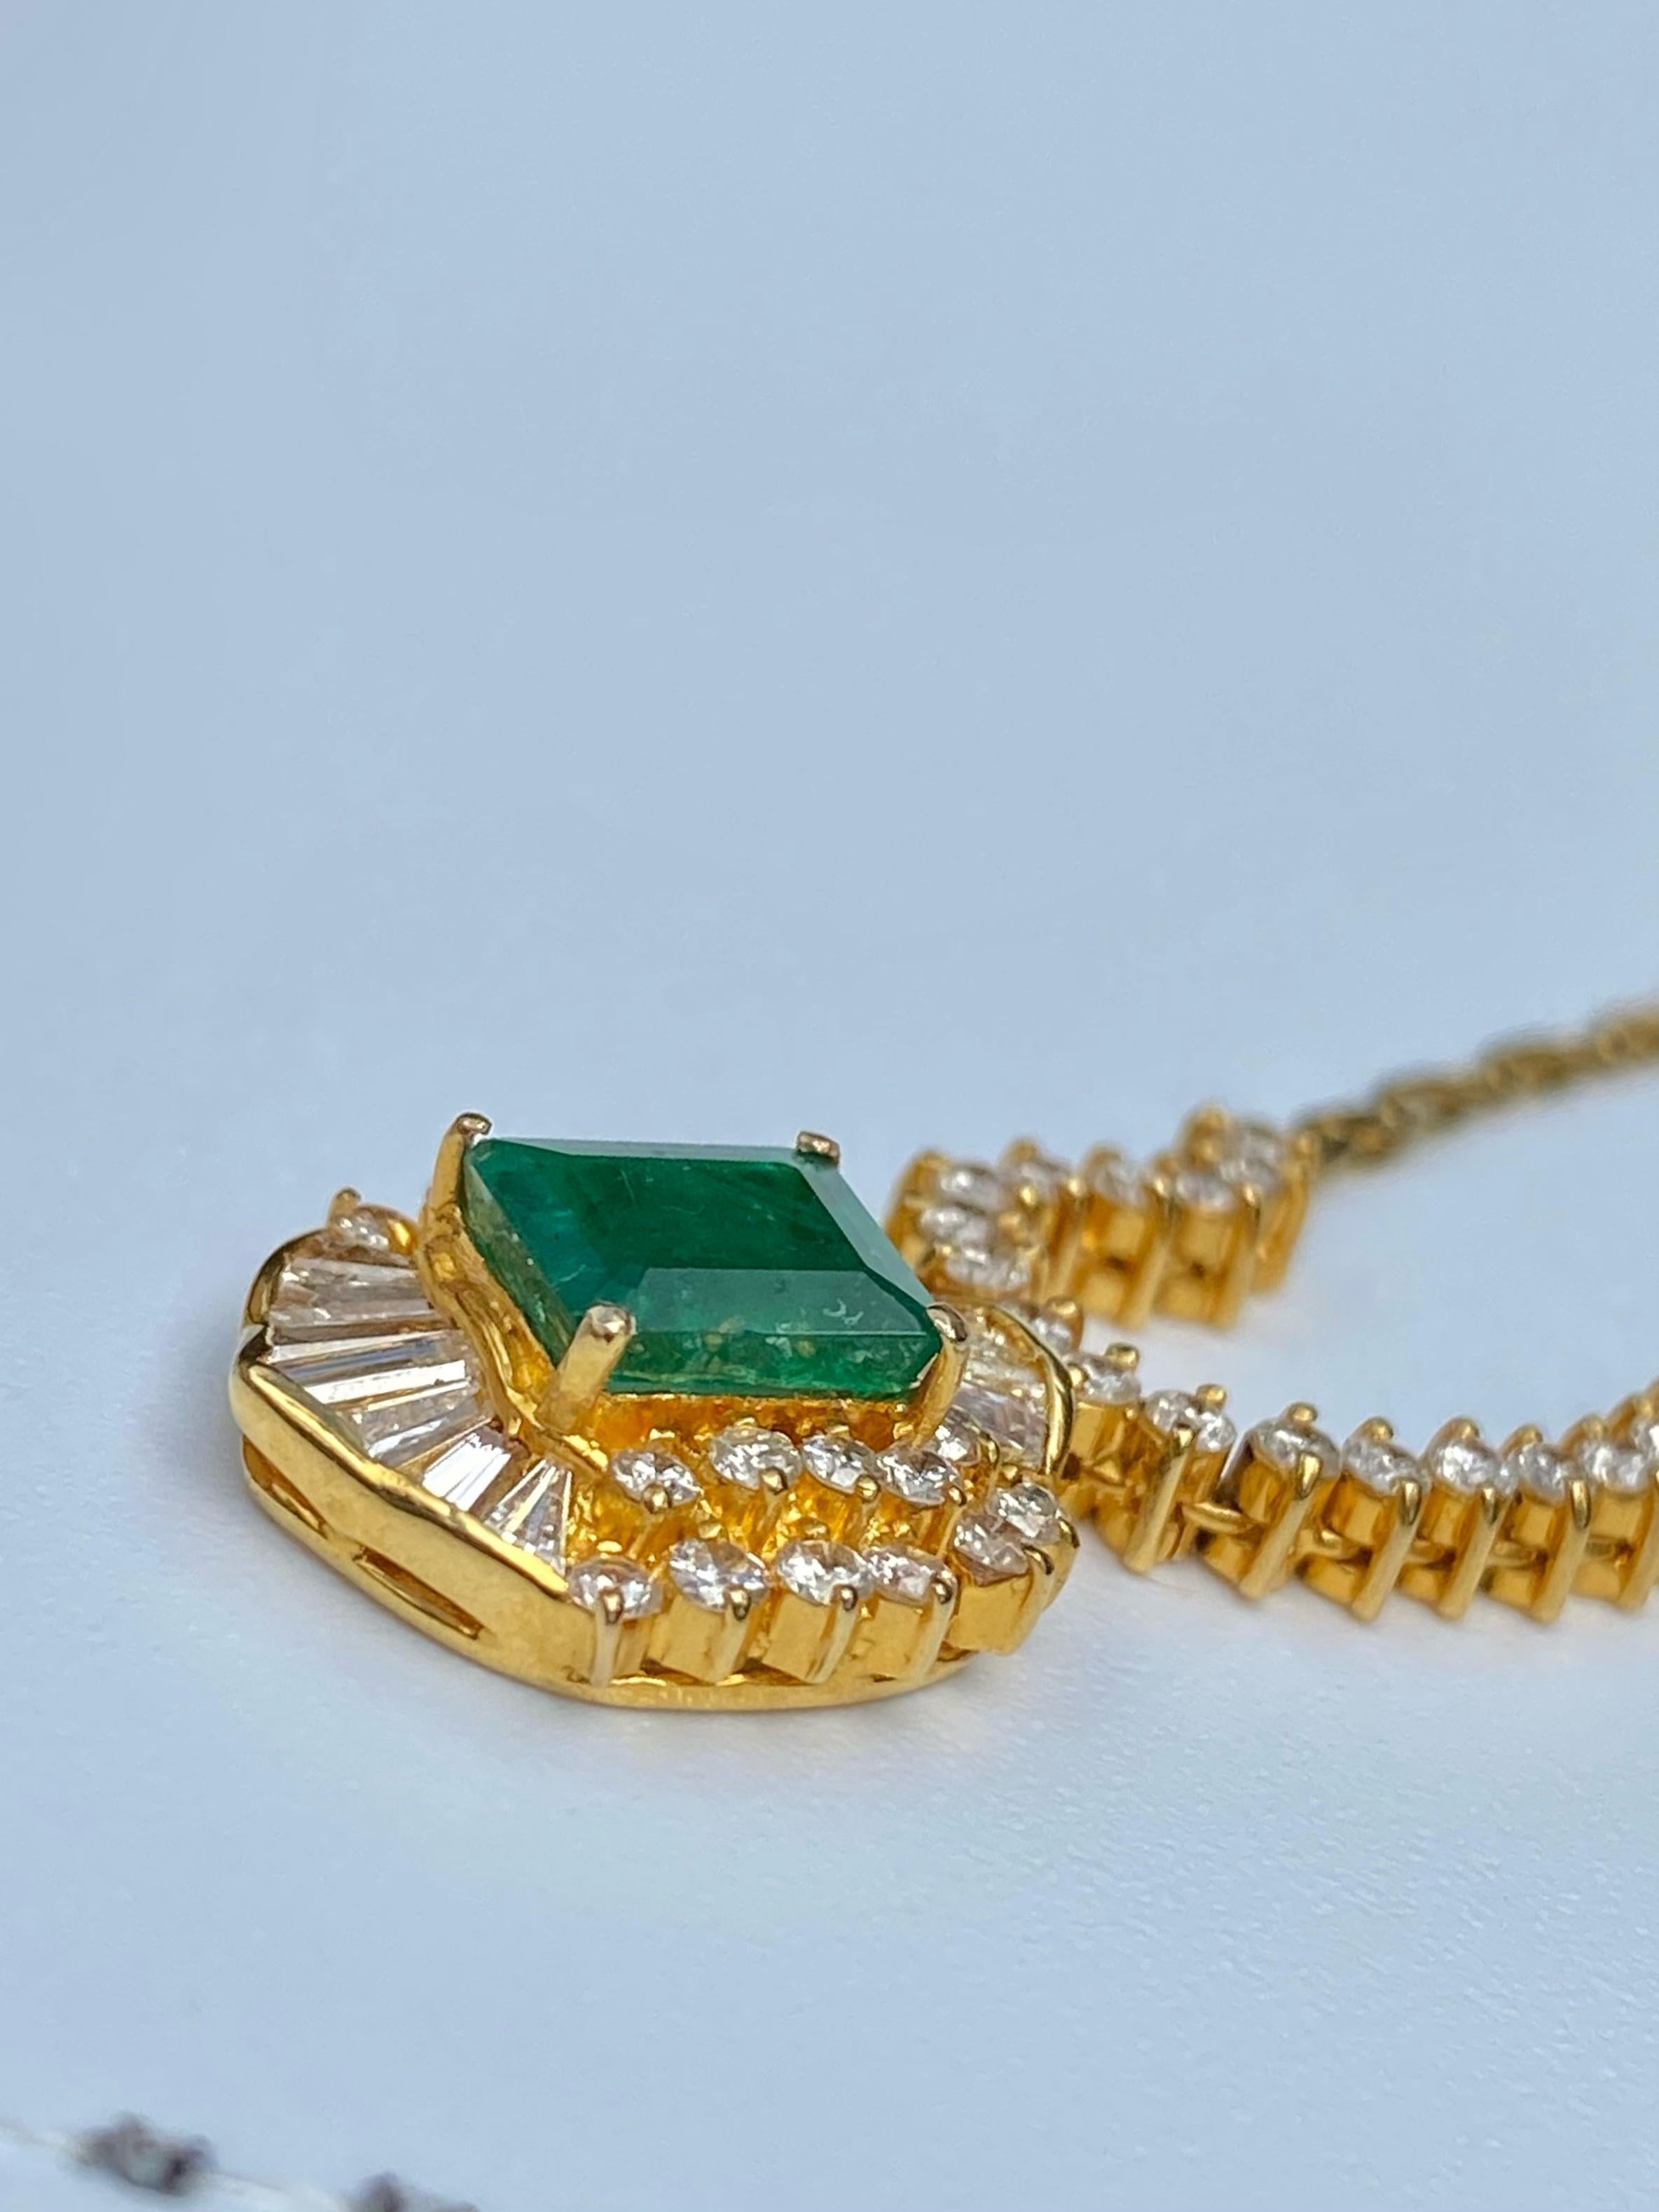 7.41 Carat Colombian Emerald and Diamond Pendant, Earring and Ring 18K Gold Set 9